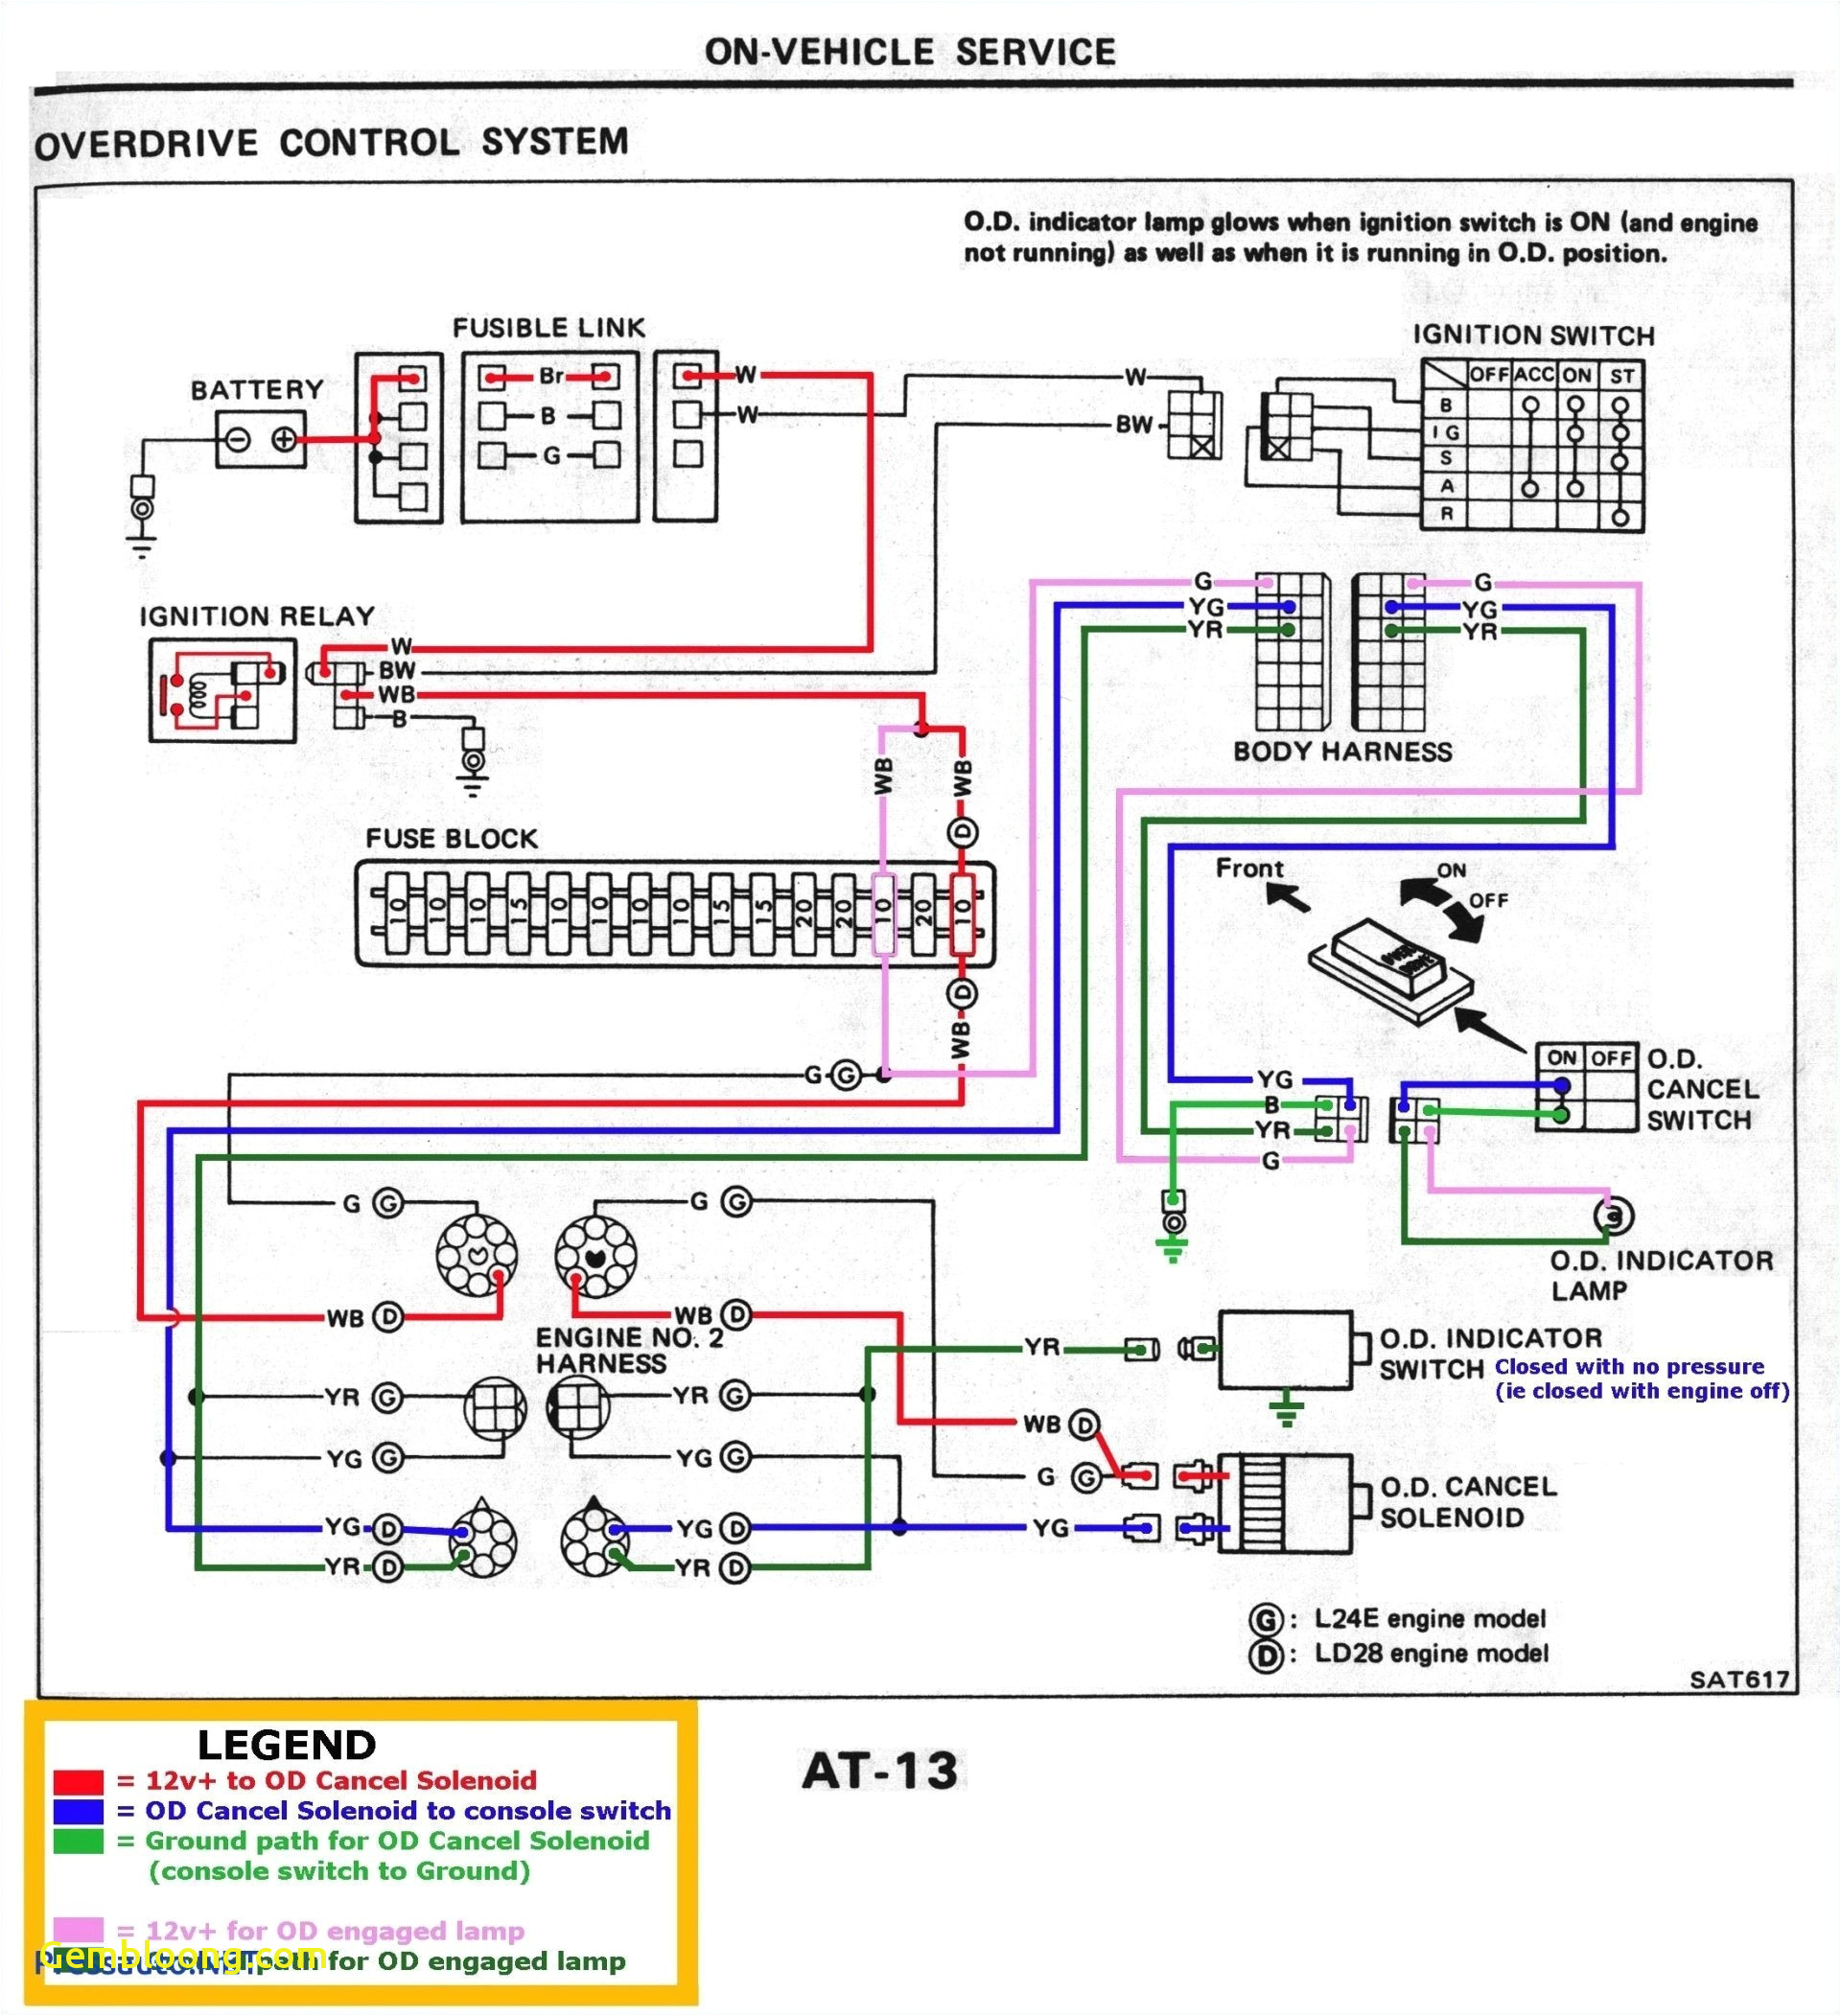 wiring diagram for a ge dryer blog wiring diagram ge dryer heating element wiring diagram data